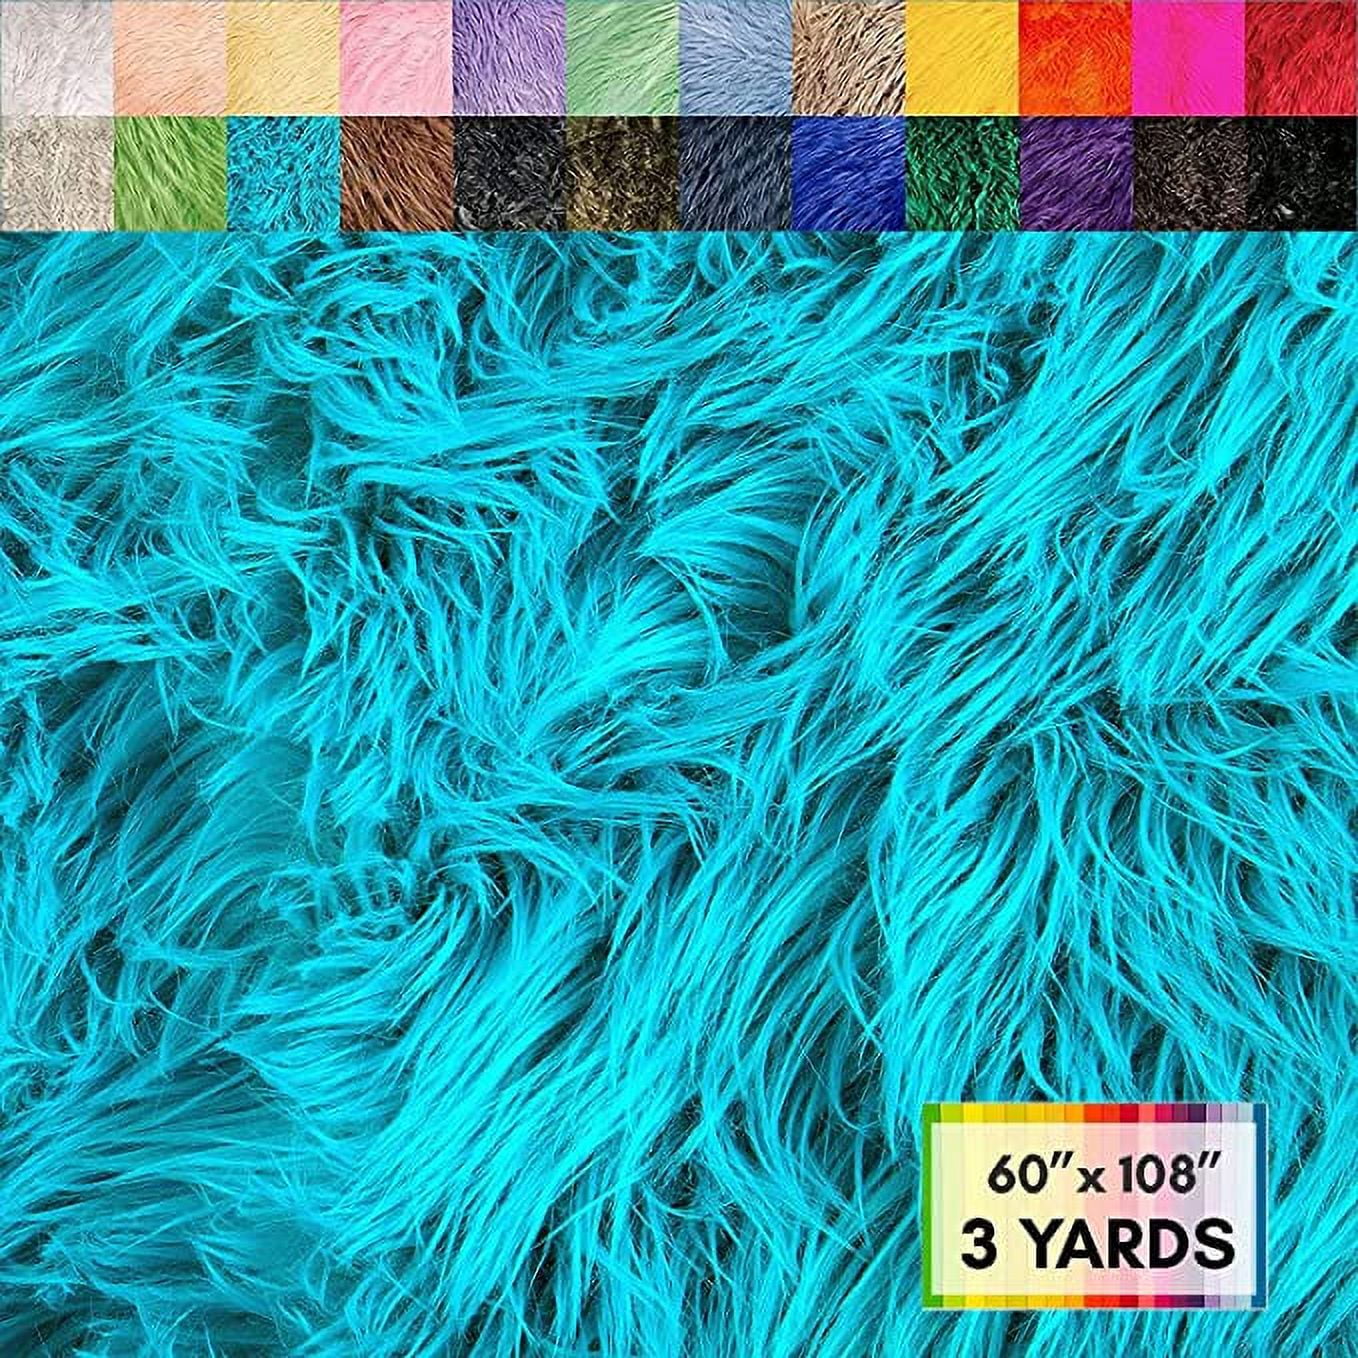 Faux Fur Fabric by The Yard - 36 x 60 Inches (90 cm x 150 cm) - White -  Craft Furry Fabric for Sewing Apparel, Rugs, Pillows, and More - Faux  Fluffy